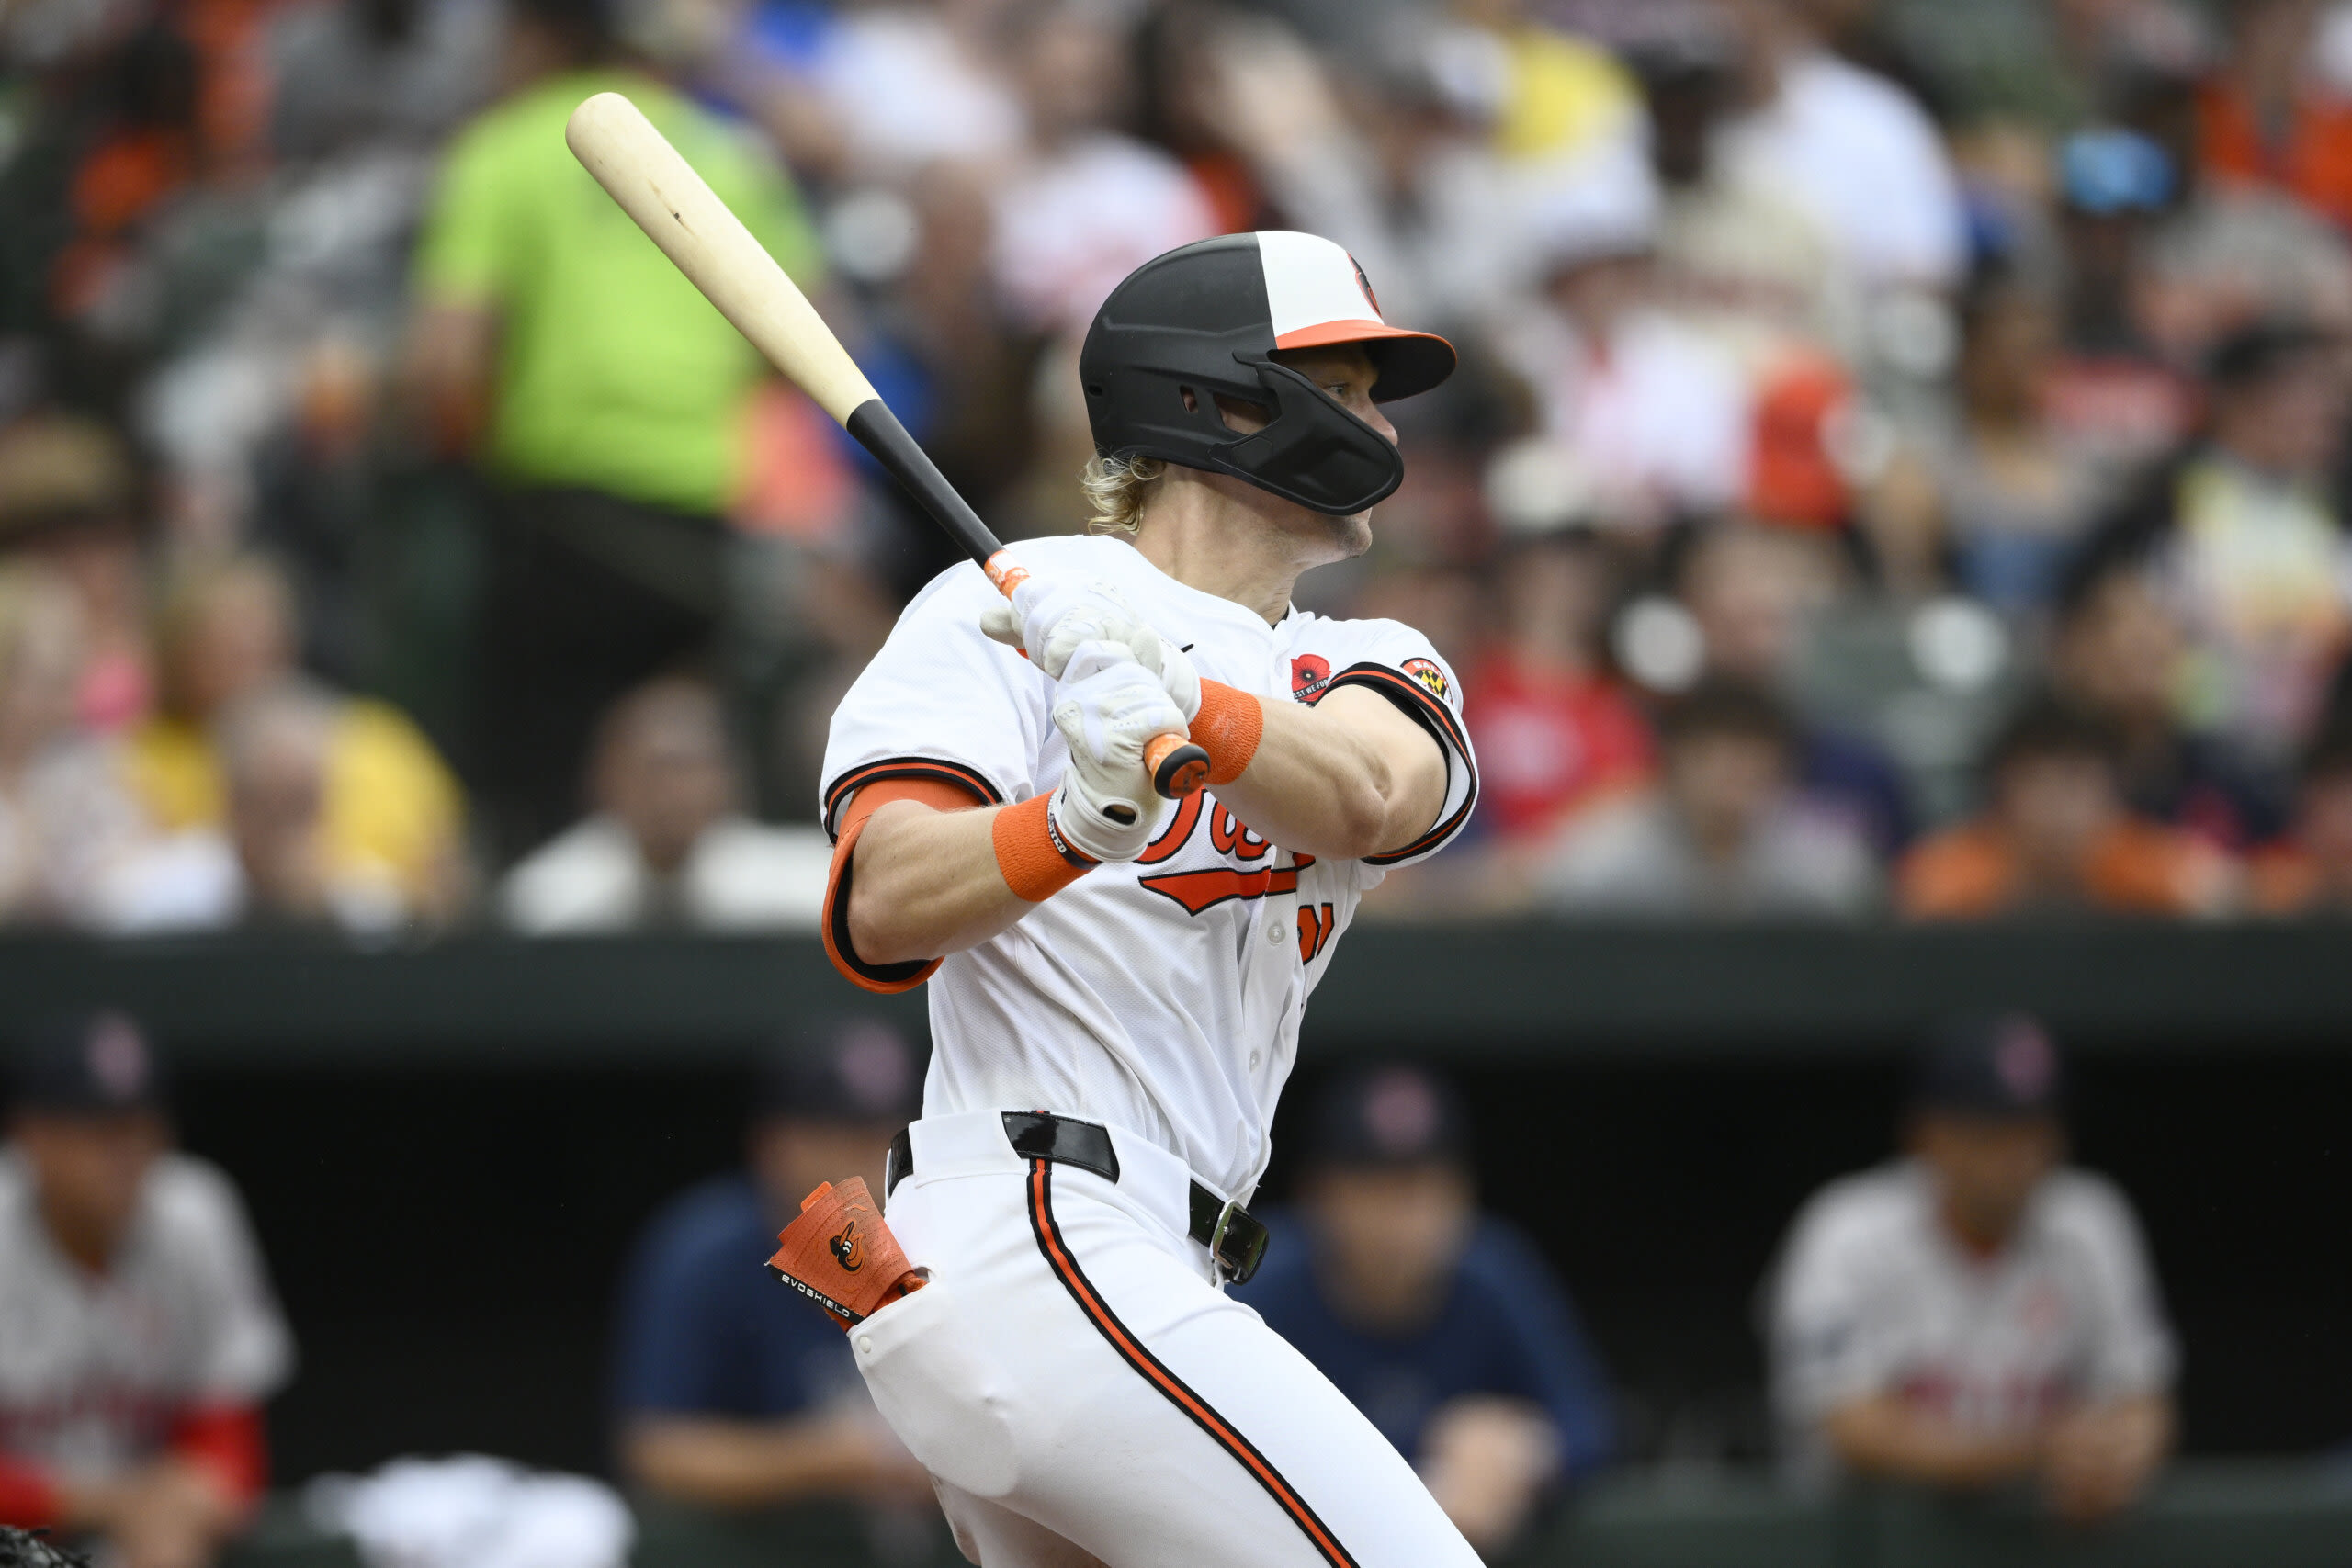 Kyle Stowers has career-high 4 RBIs as Orioles topple Red Sox 11-3 - WTOP News